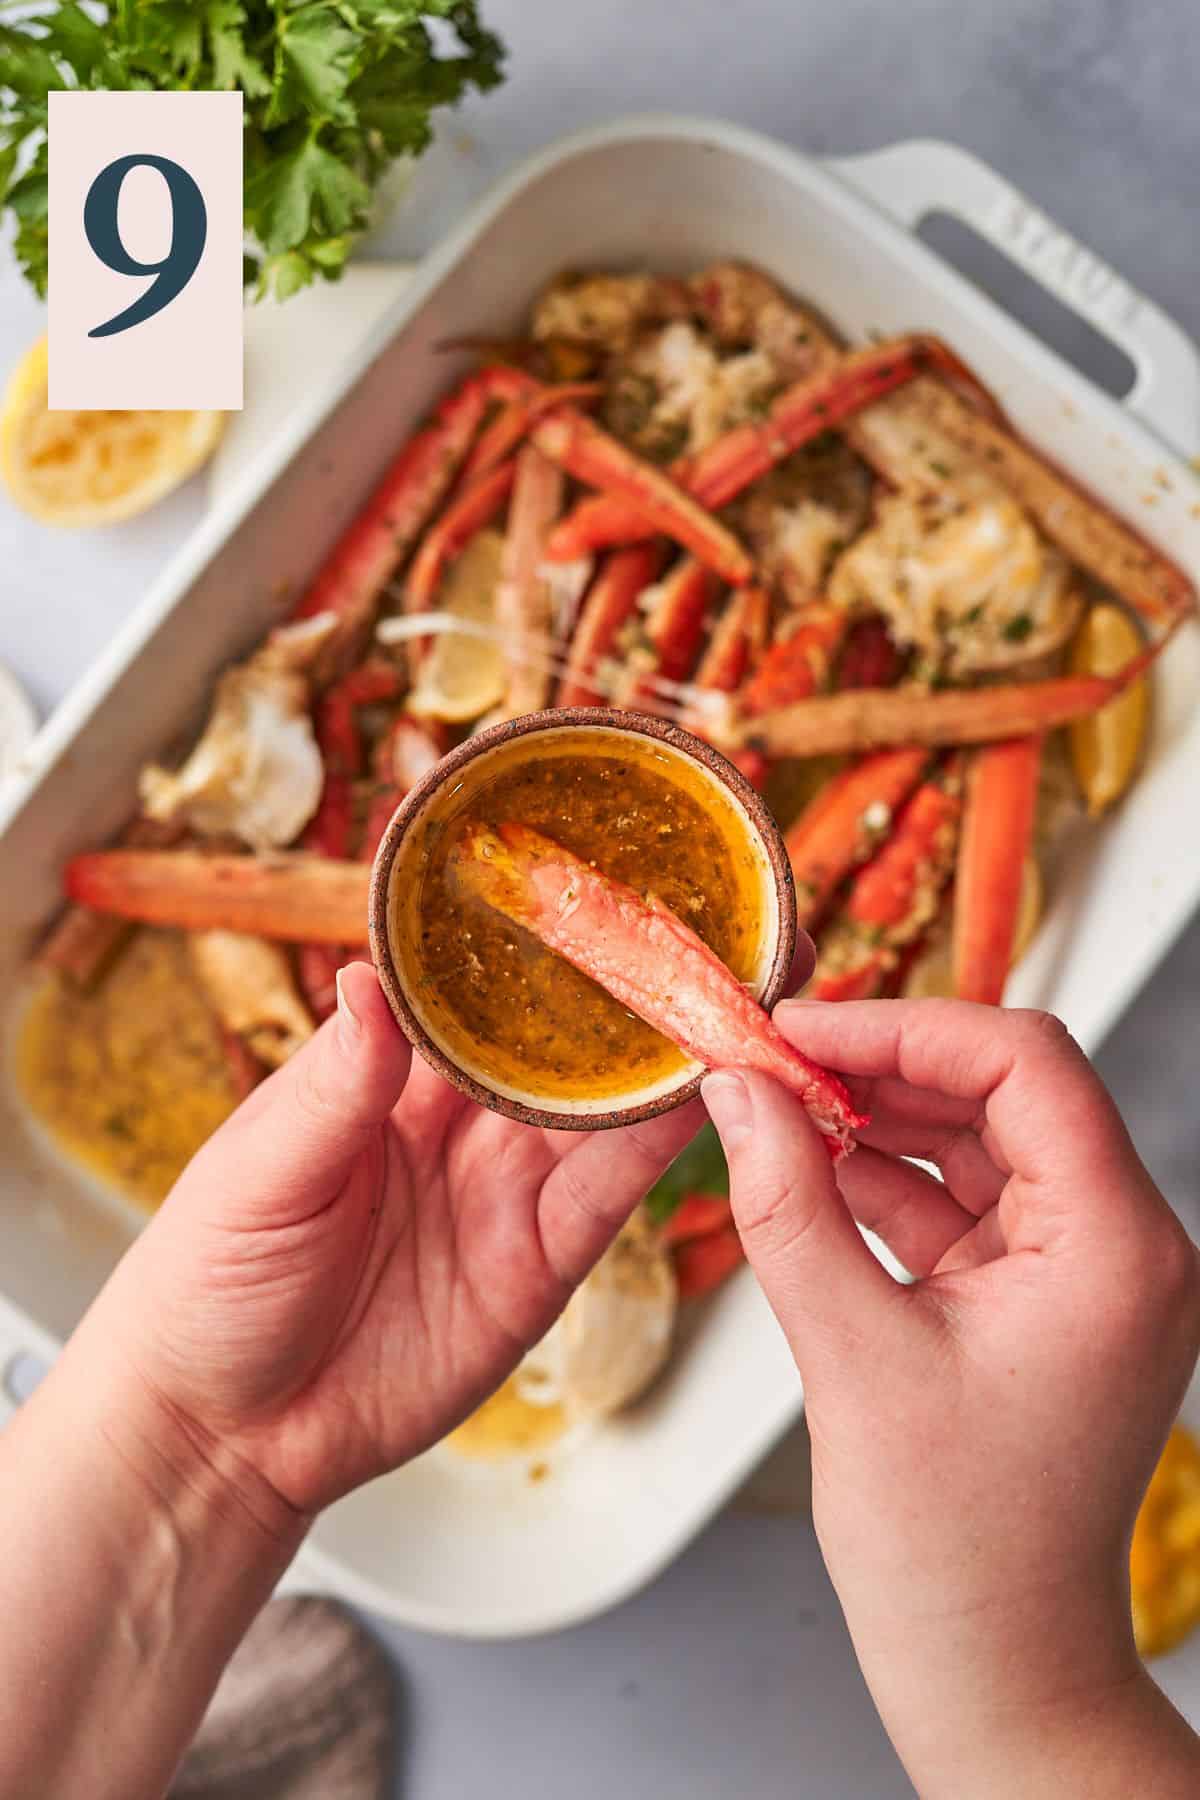 Dipping crab meat into a spicy butter sauce.